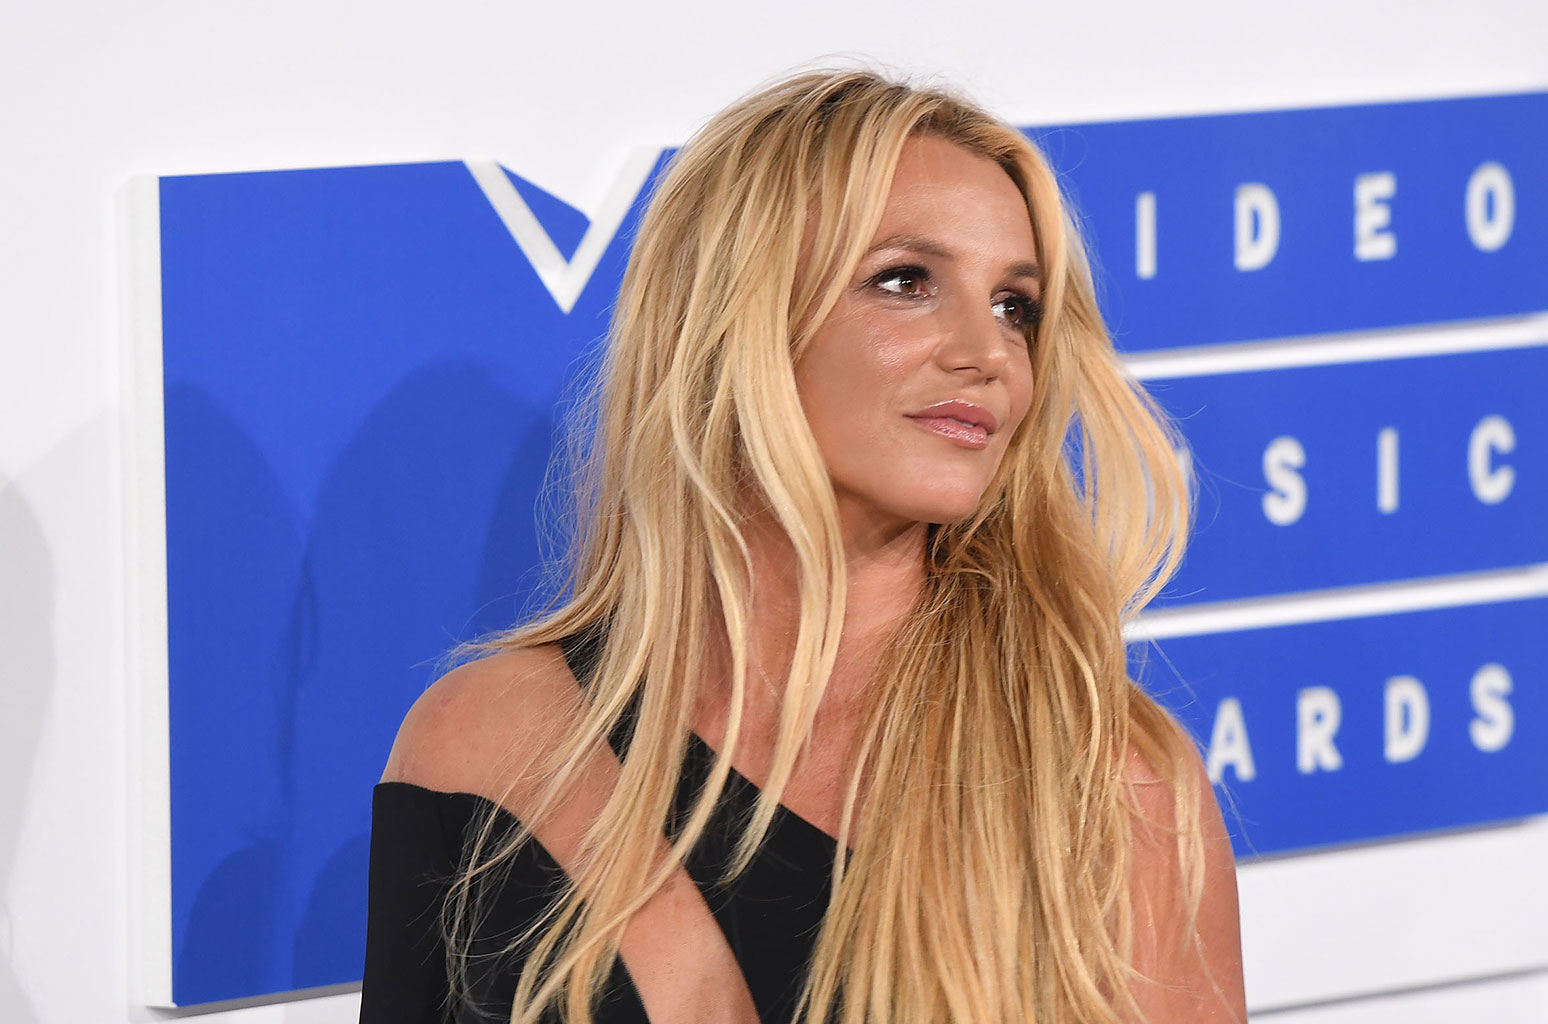 Britney Spears post-conservatorship project 'The Idol'